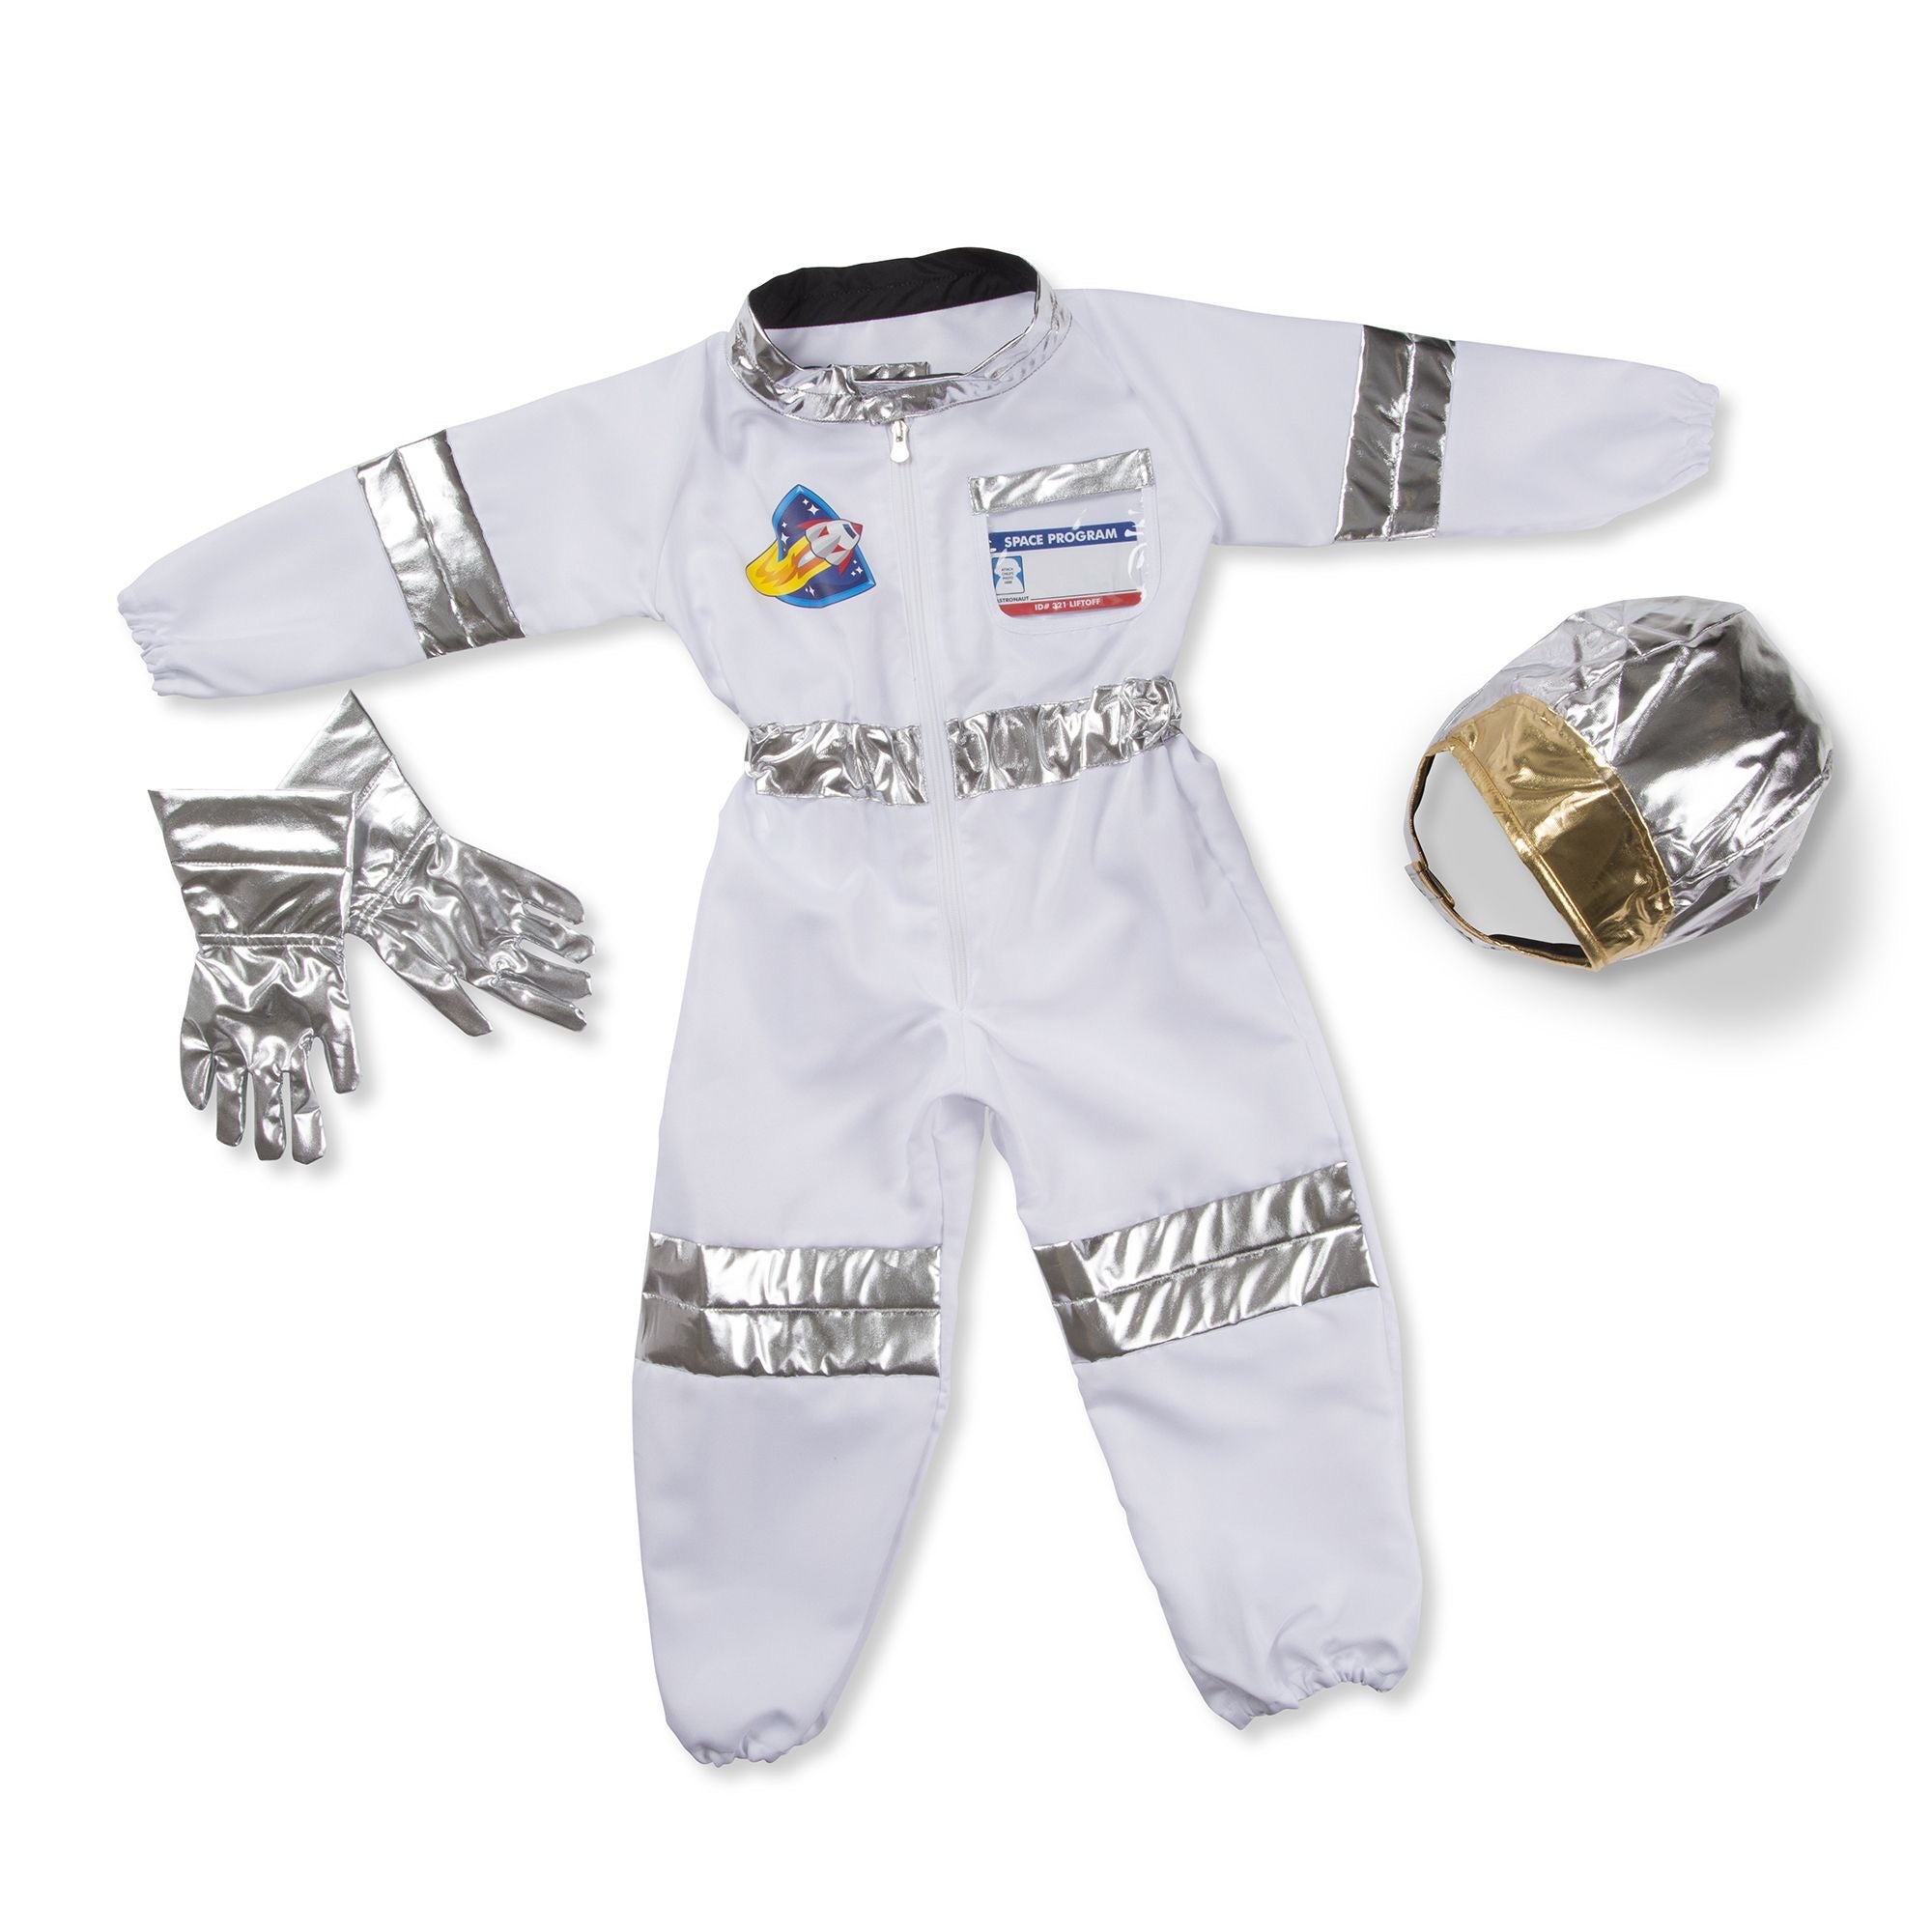 Astronaut Role Play Dressup Costume by Melissa & Doug #8503